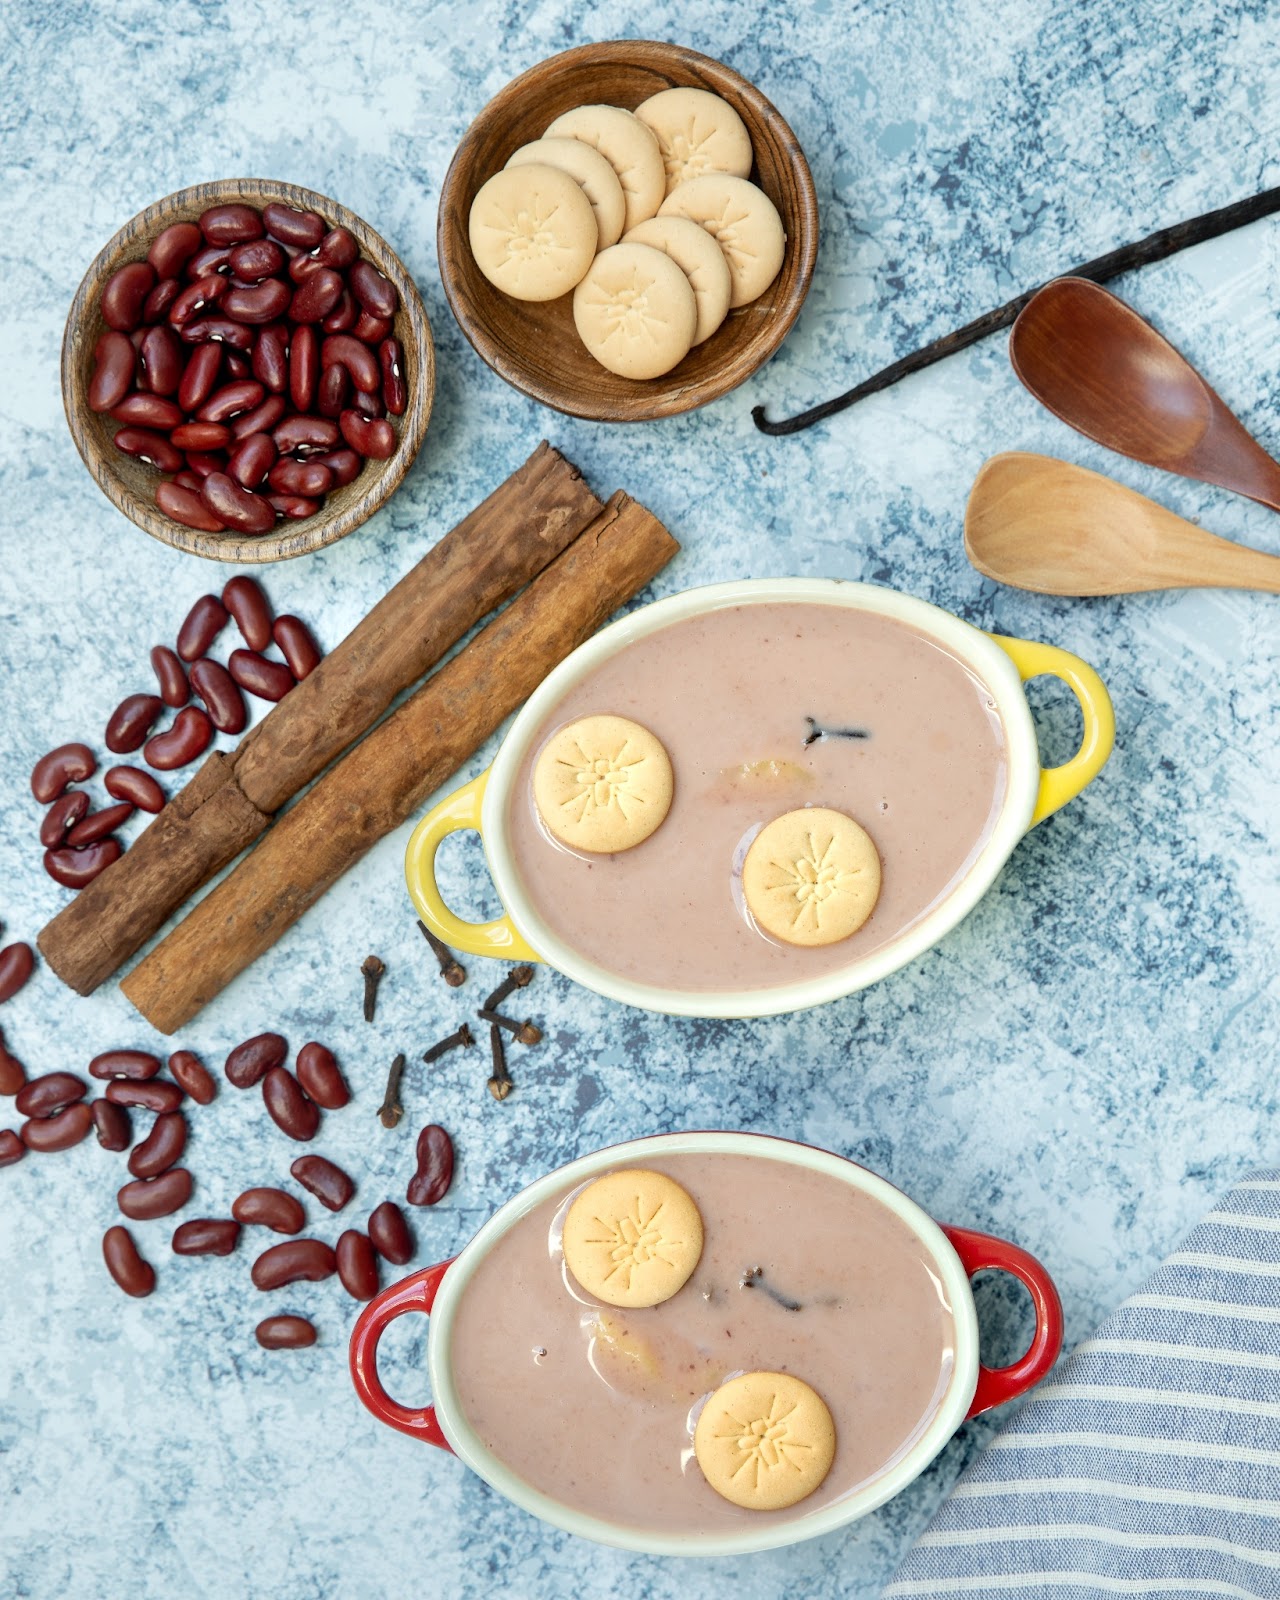 Habichuelas con Dulce, a sweet Dominican dessert made with beans, coconut milk, sugar, and spices.